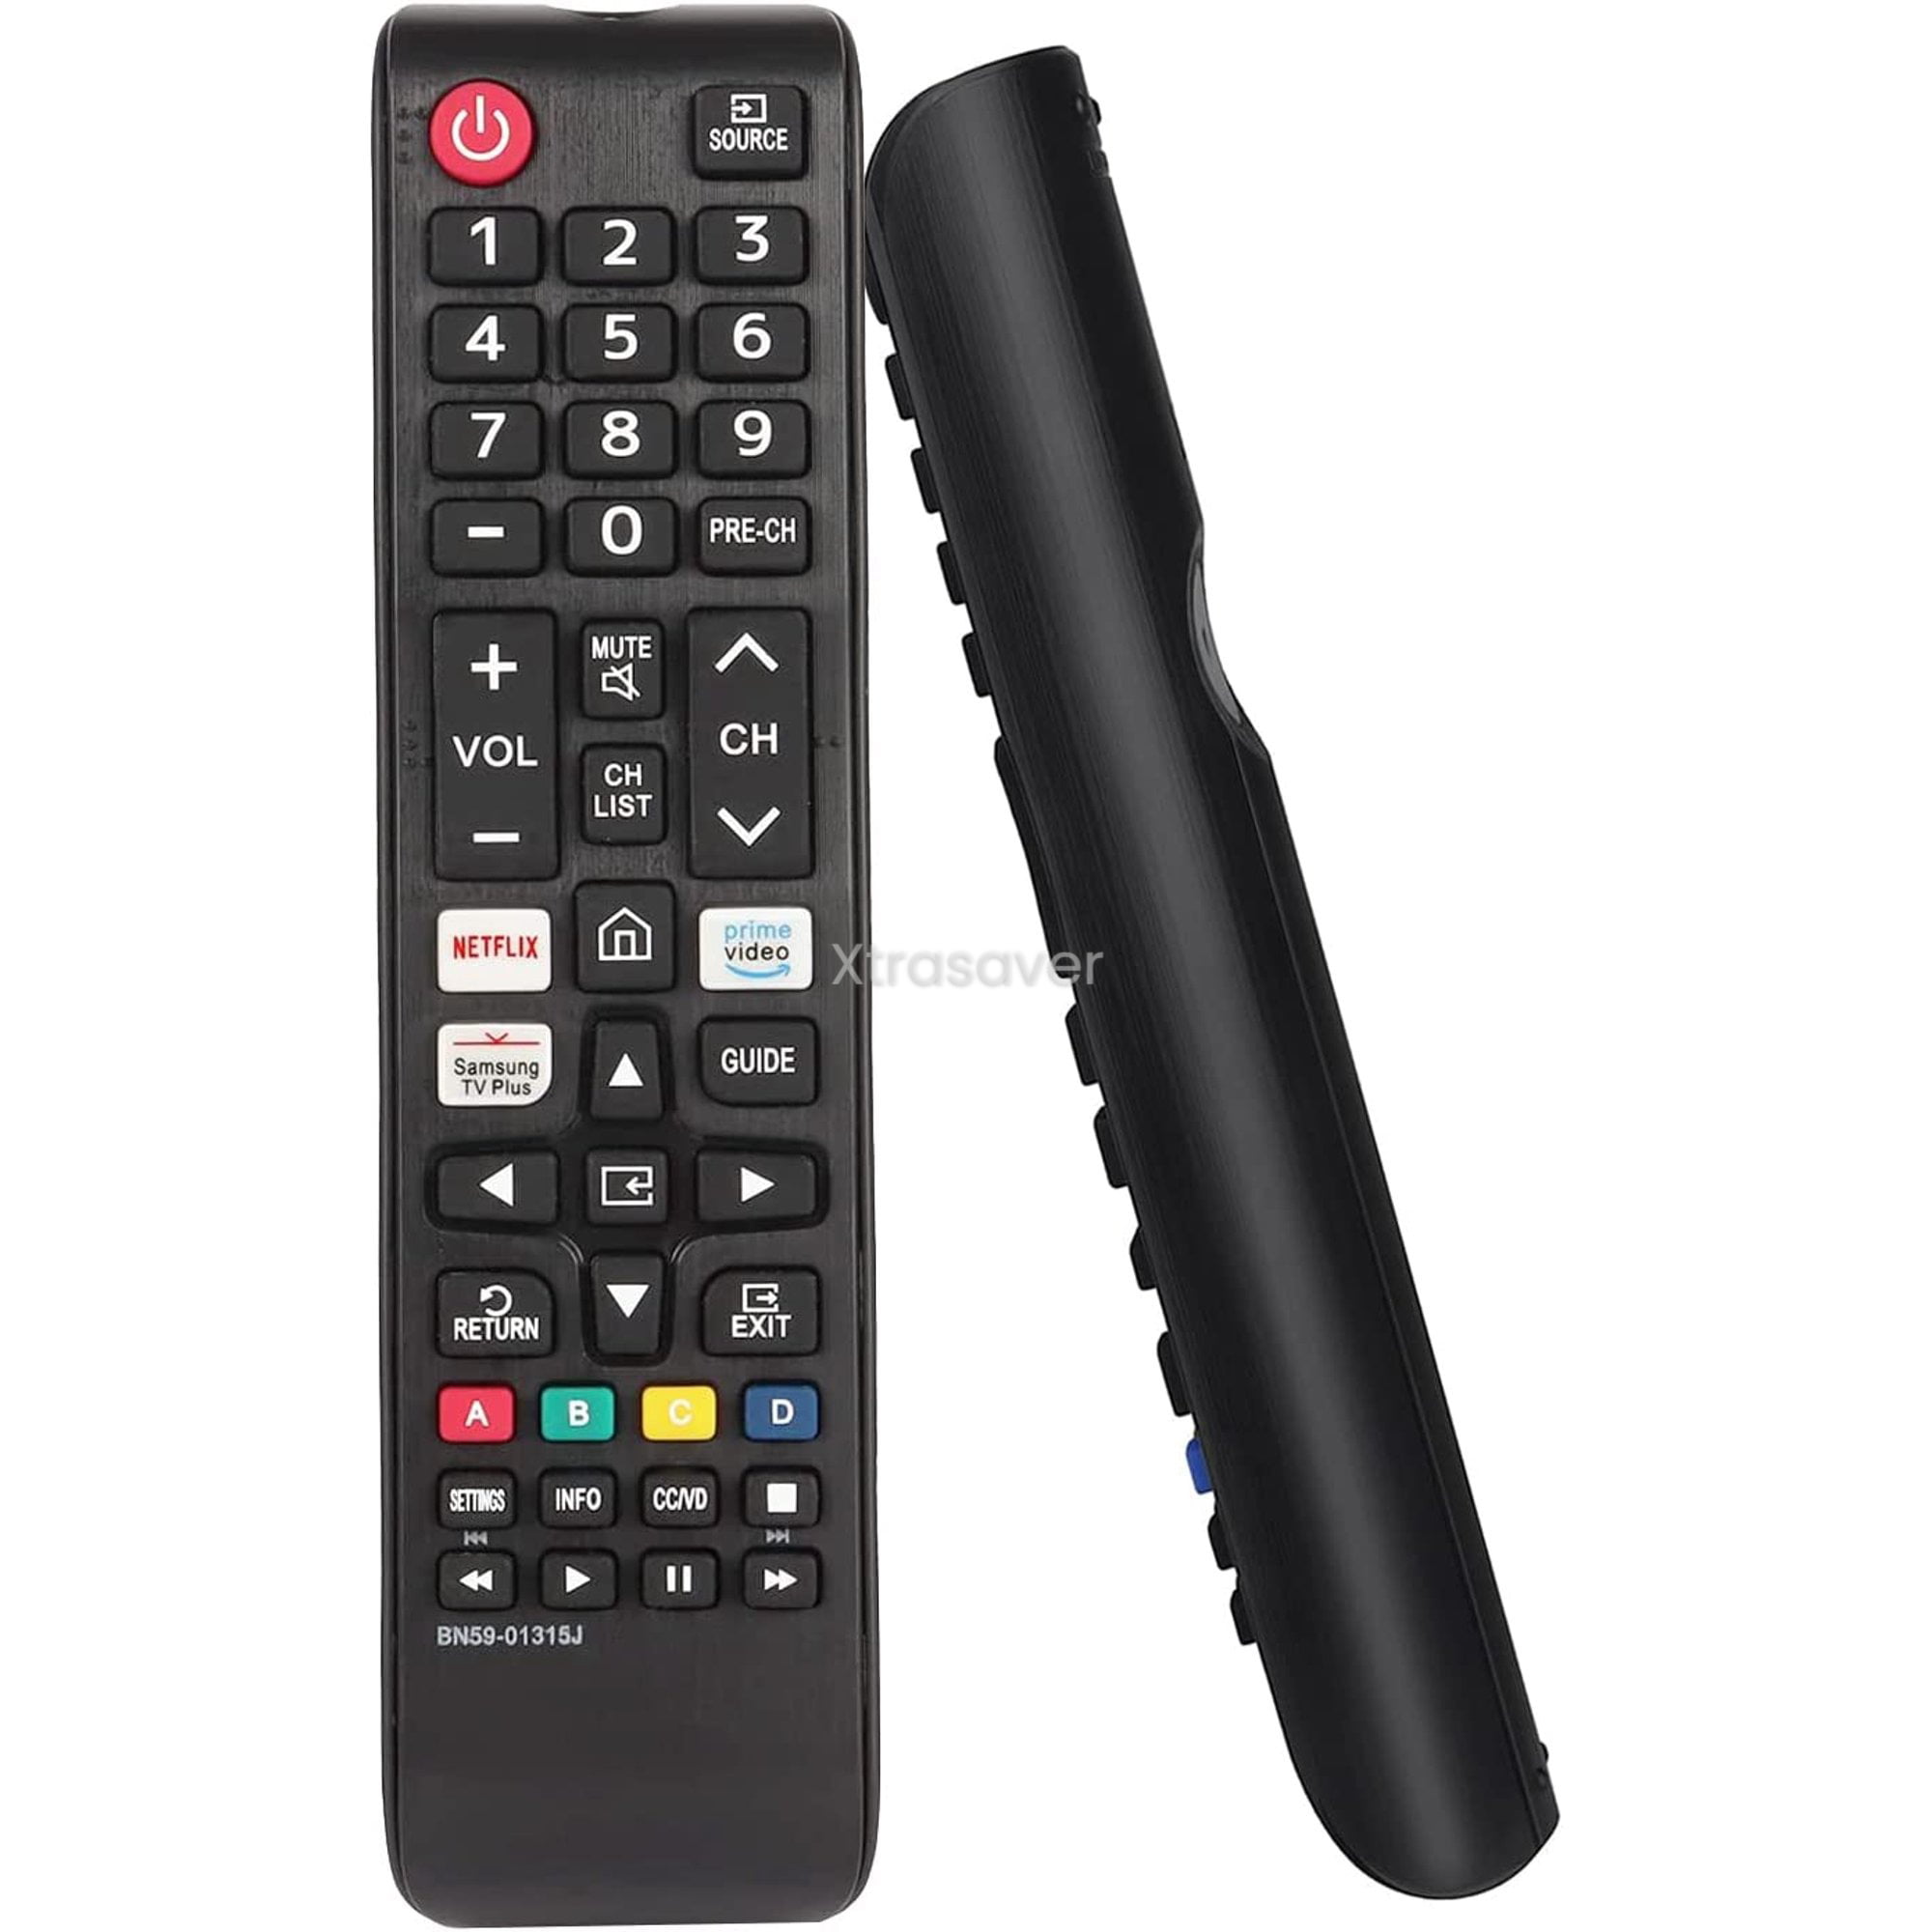 Xtrasaver BN59-01315J Universal Remote Control for All Samsung TV Remote  LCD LED QLED SUHD UHD HDTV Curved Plasma 4K 3D Smart TVs, with Shortcuts  for